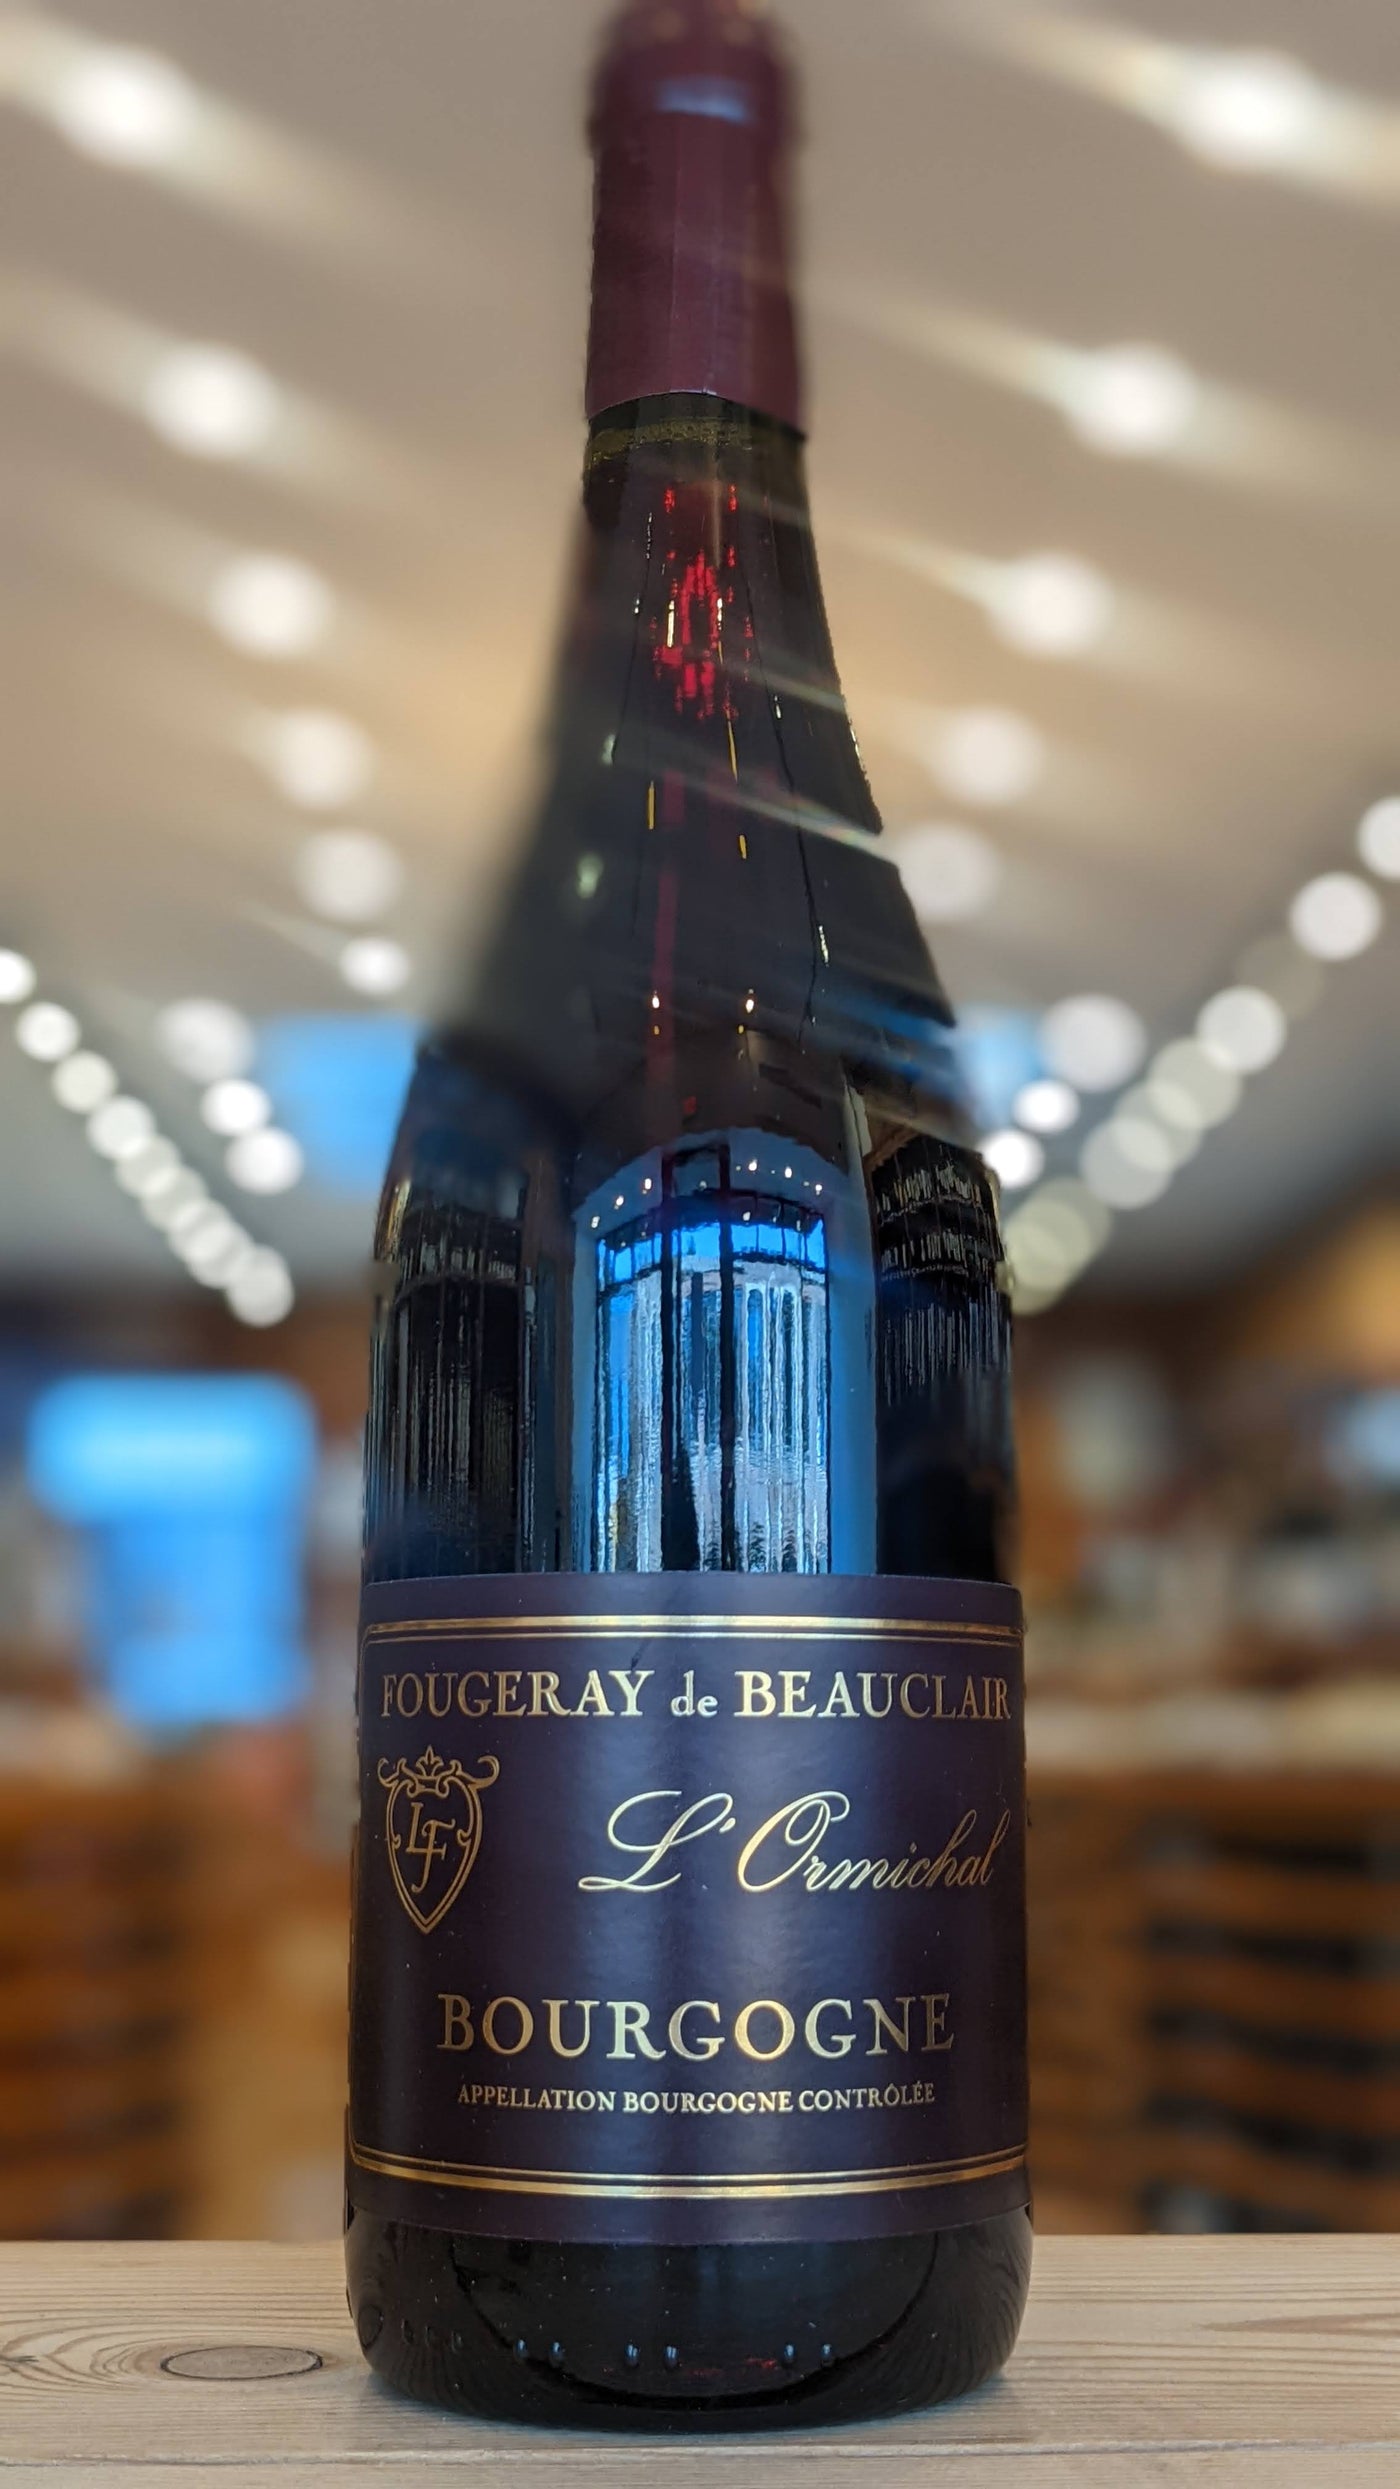 Fougeray Beauclair L'ormichal Rouge 2019